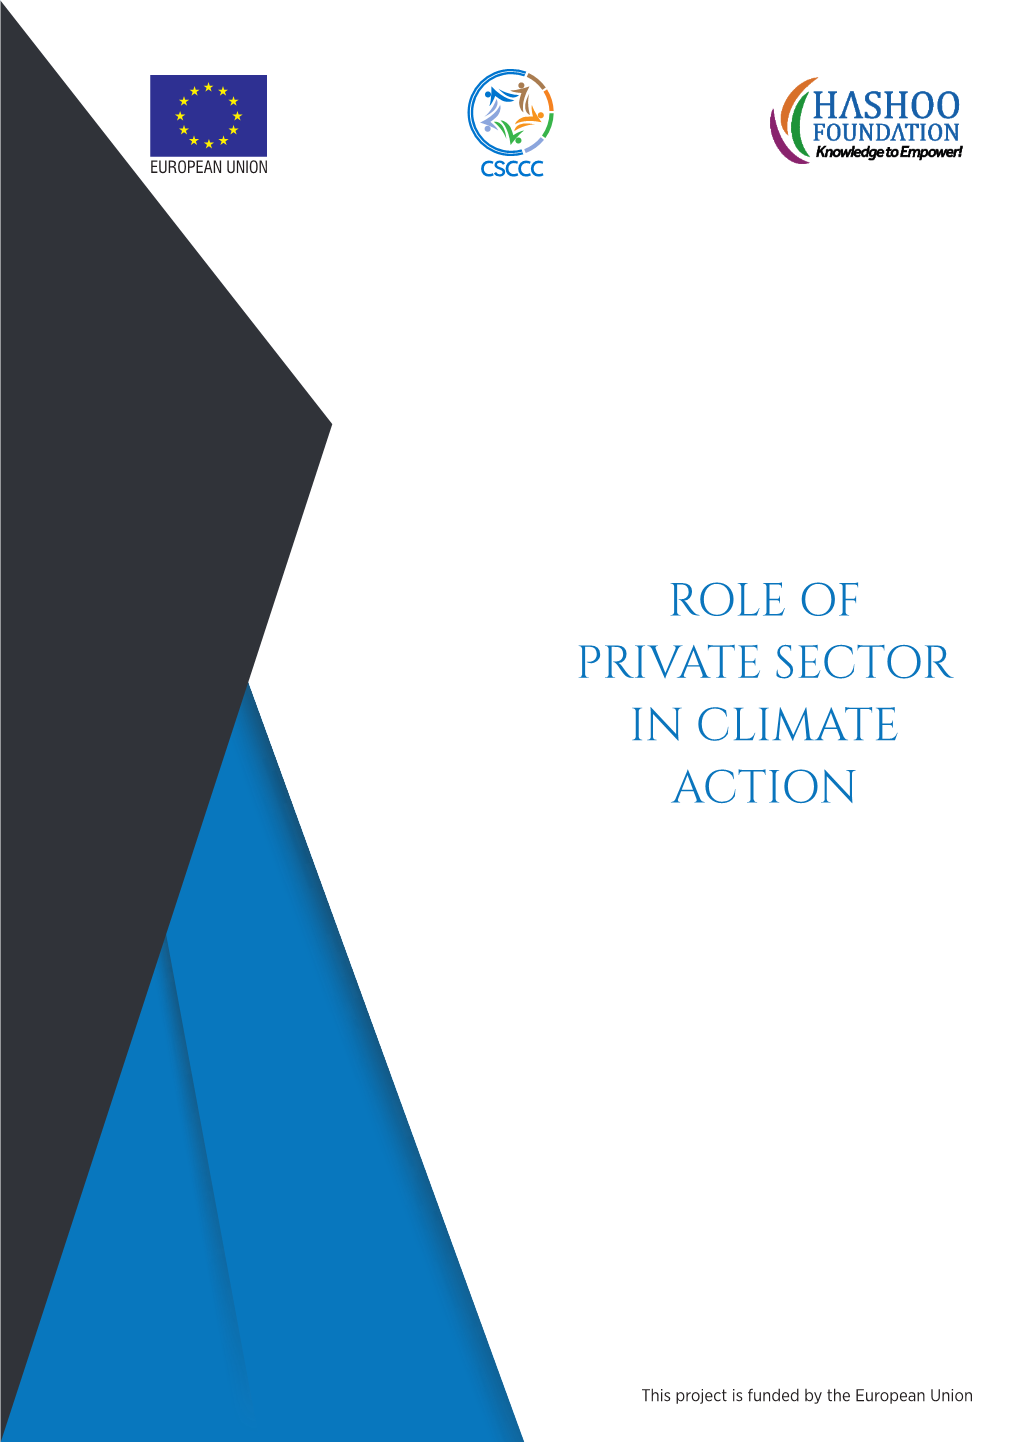 Role of Private Sector in Climate Action 2019